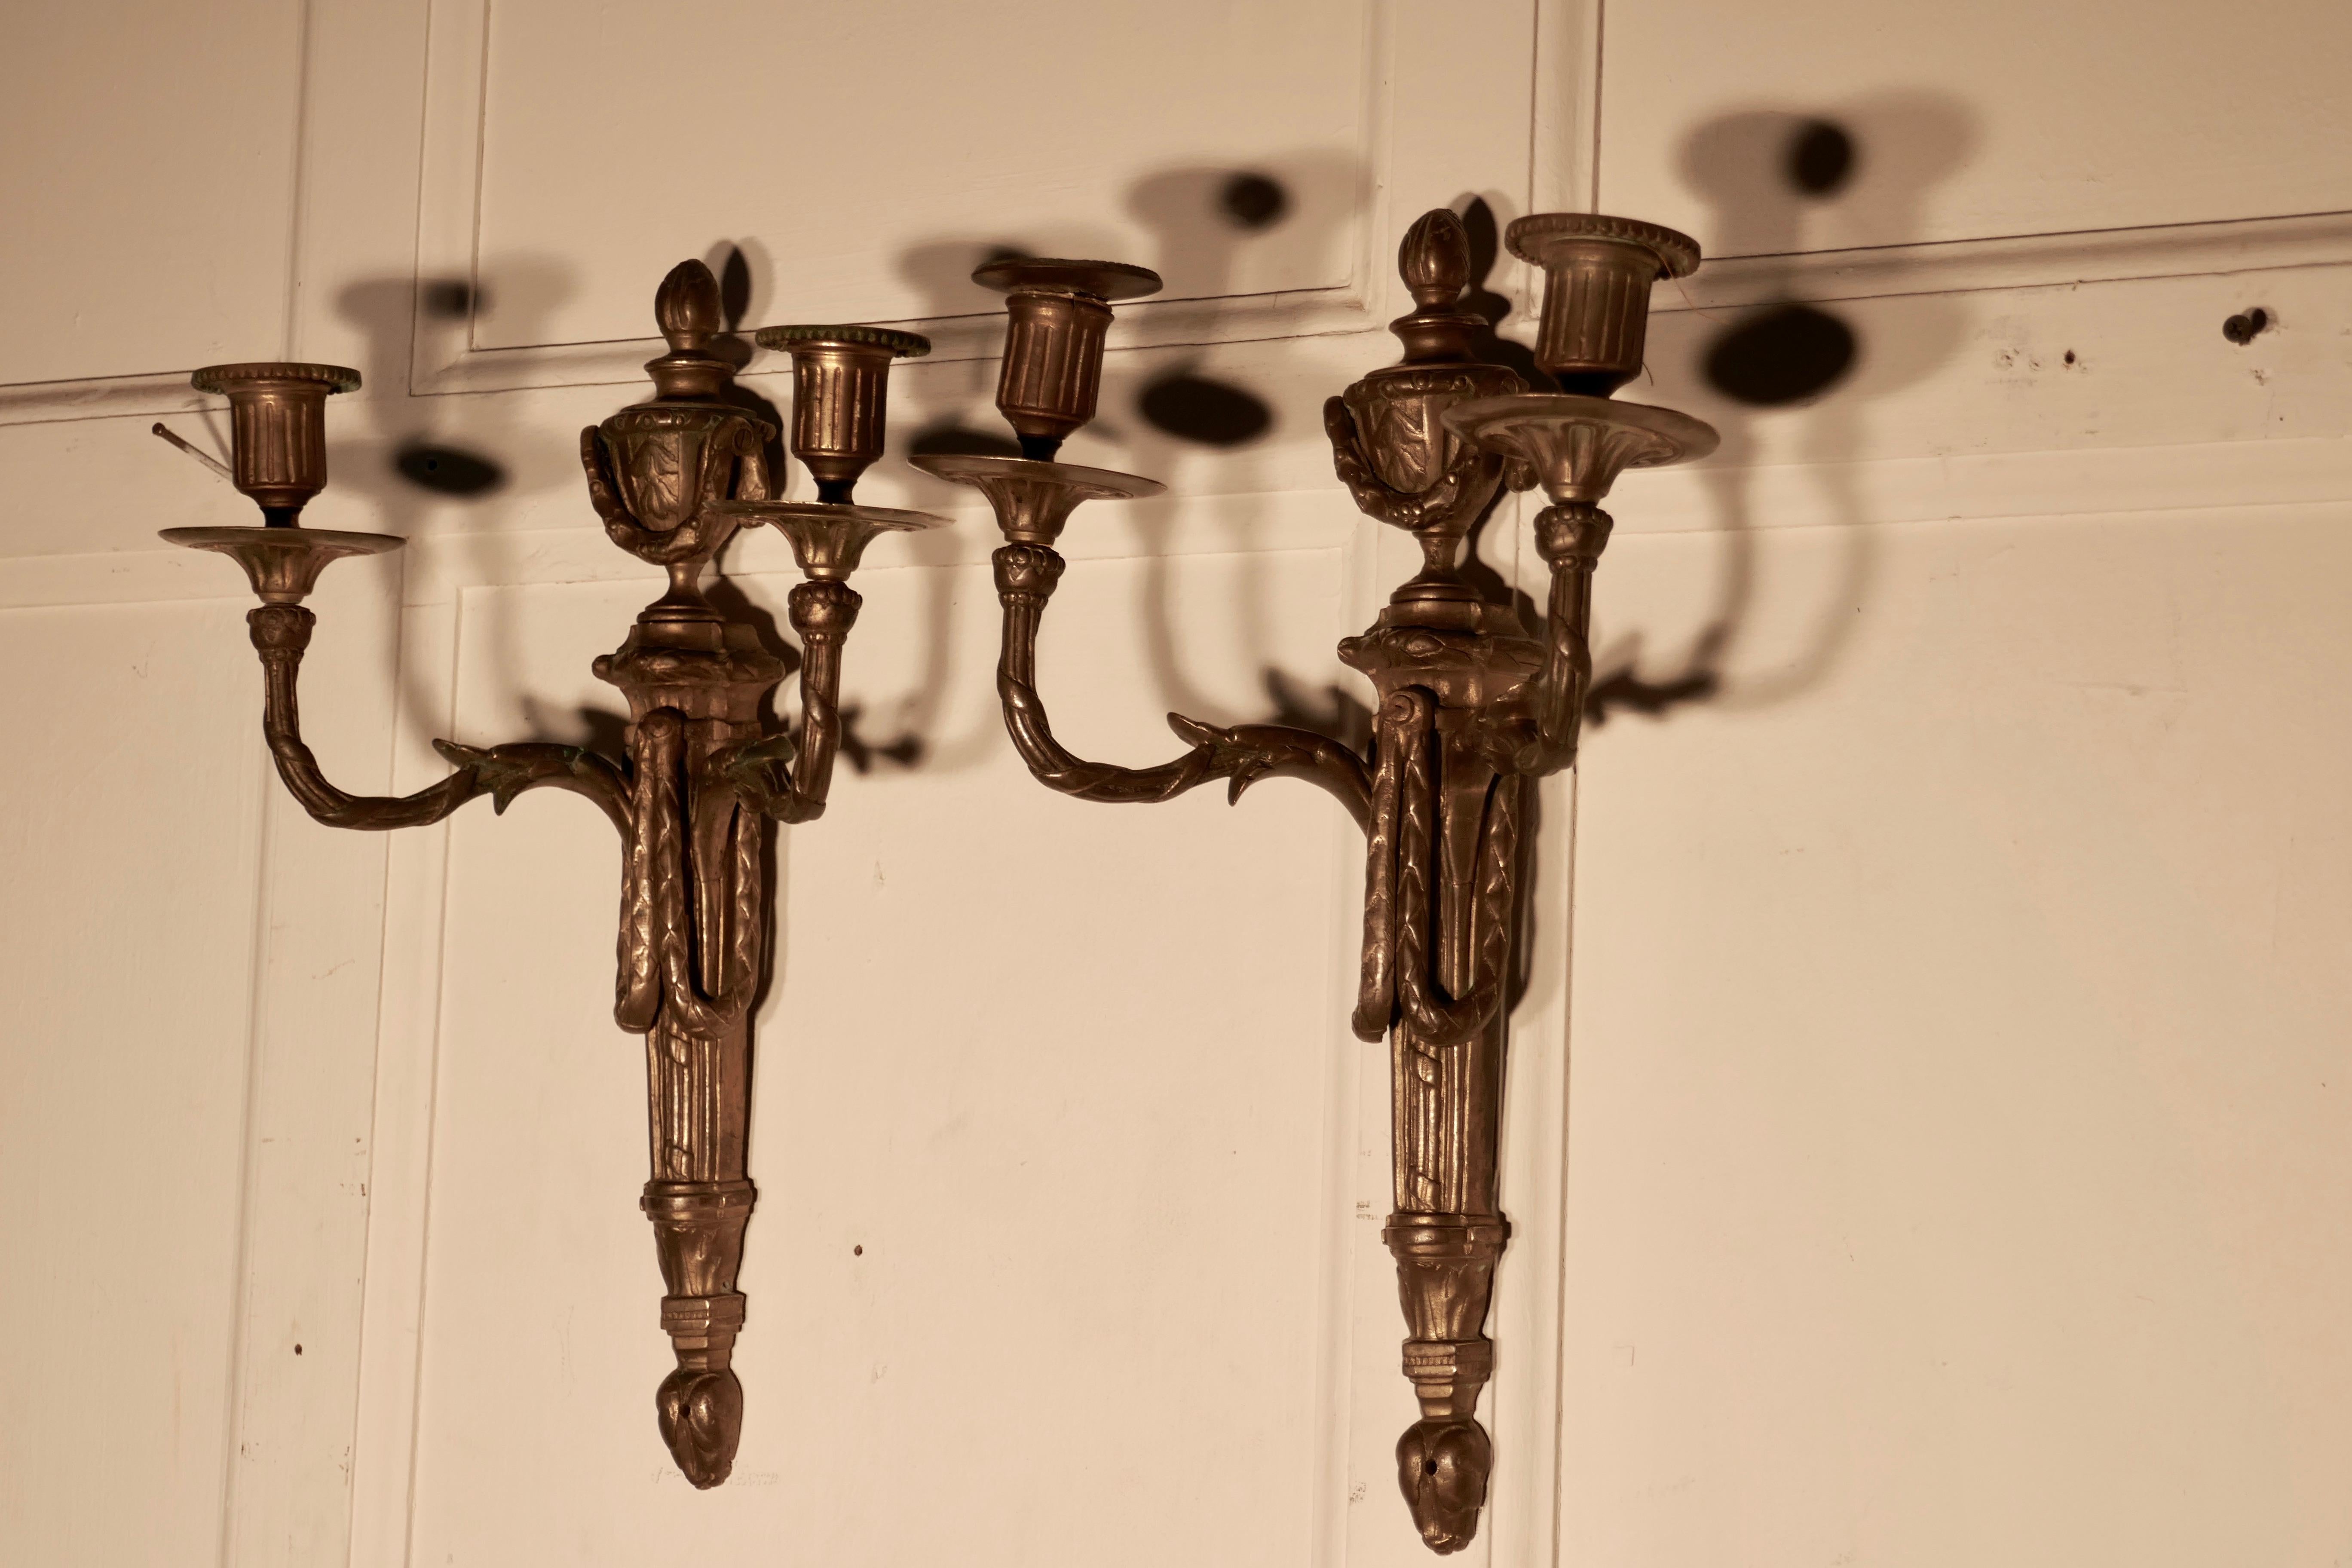 An early 19th century pair of french brass twin wall sconces

A pair of large French gilded twin arm antique wall candle sconces, the ornate leaf scrolling arms are decorated with swags and urns, they are still with their original candle sconces